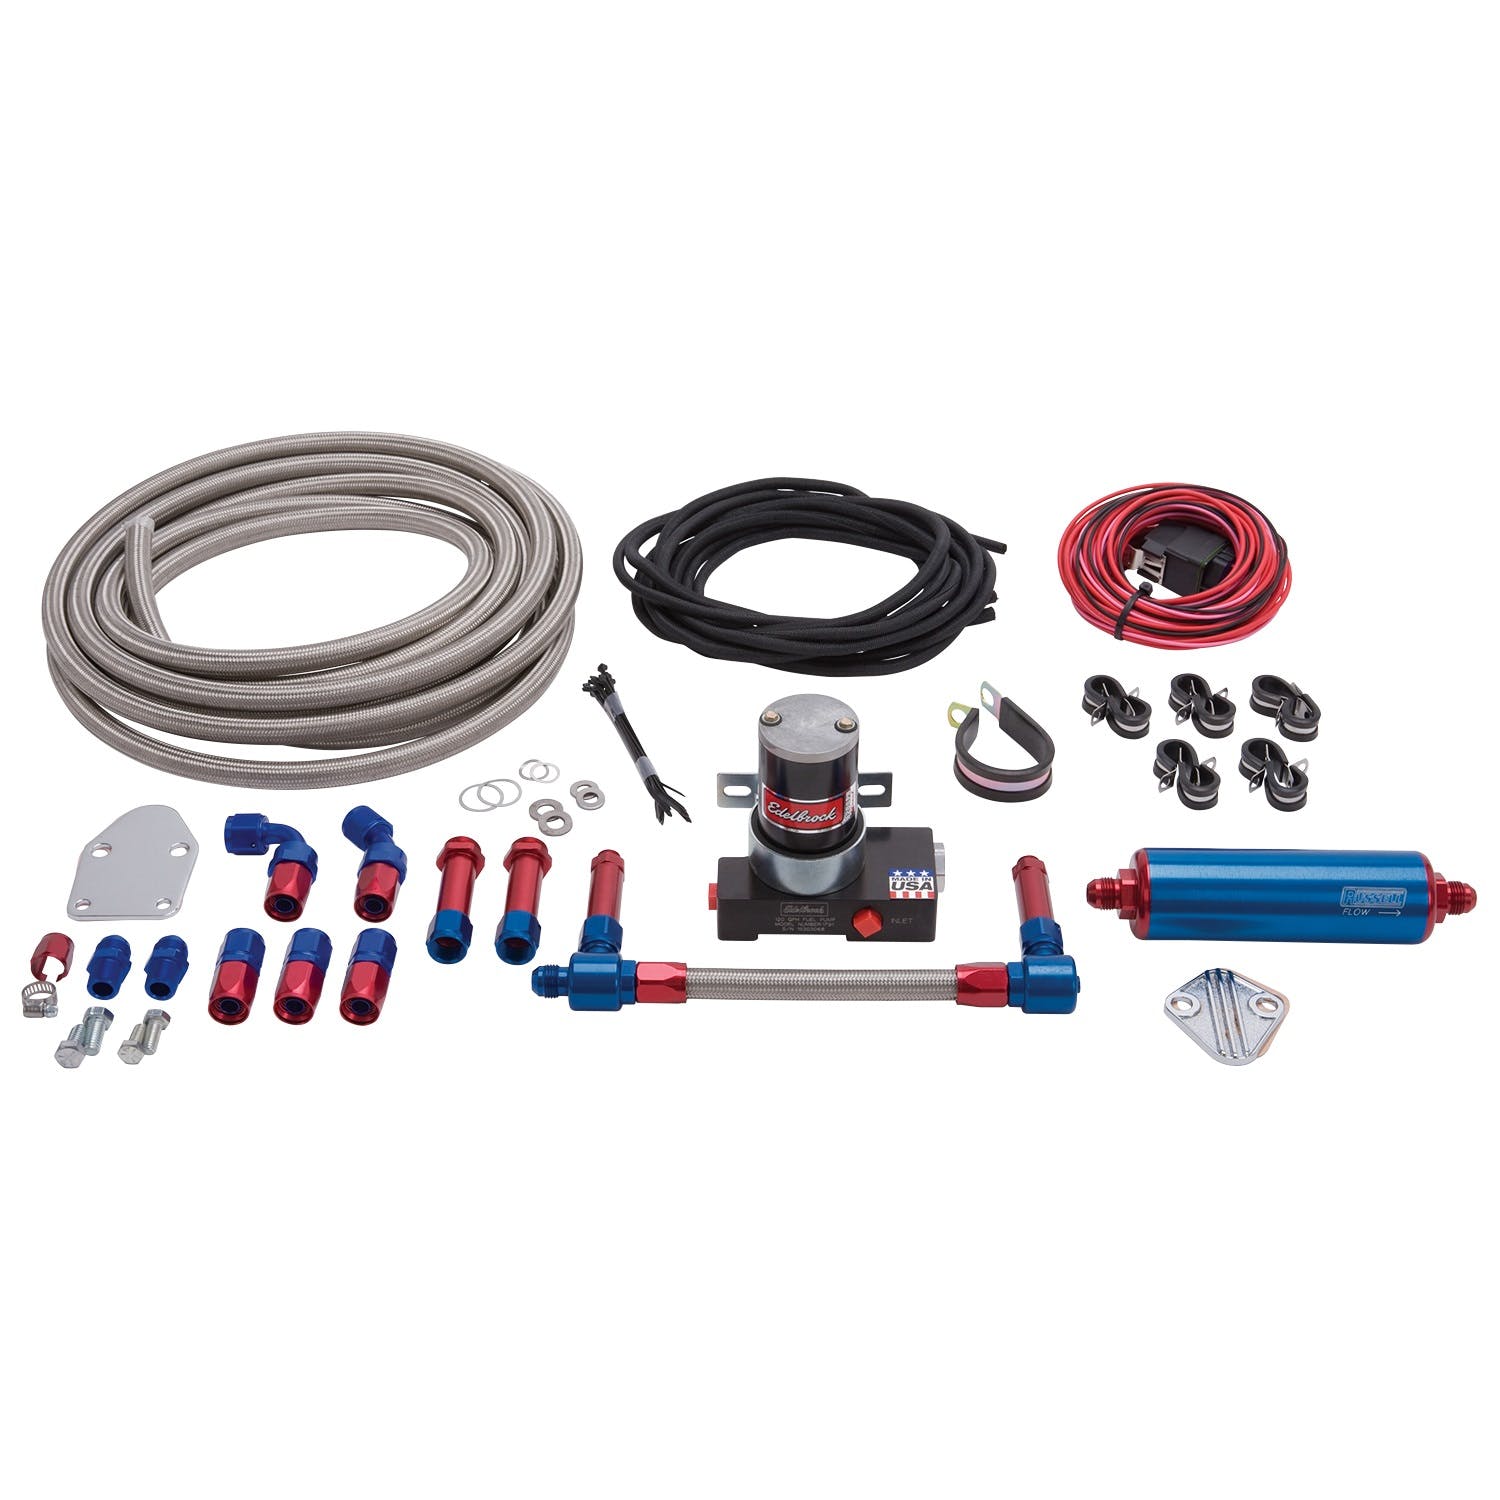 Russell 641590 Complete Carb plumbing kit. Holley/Demon Dual feed carb. Red/blue finish.